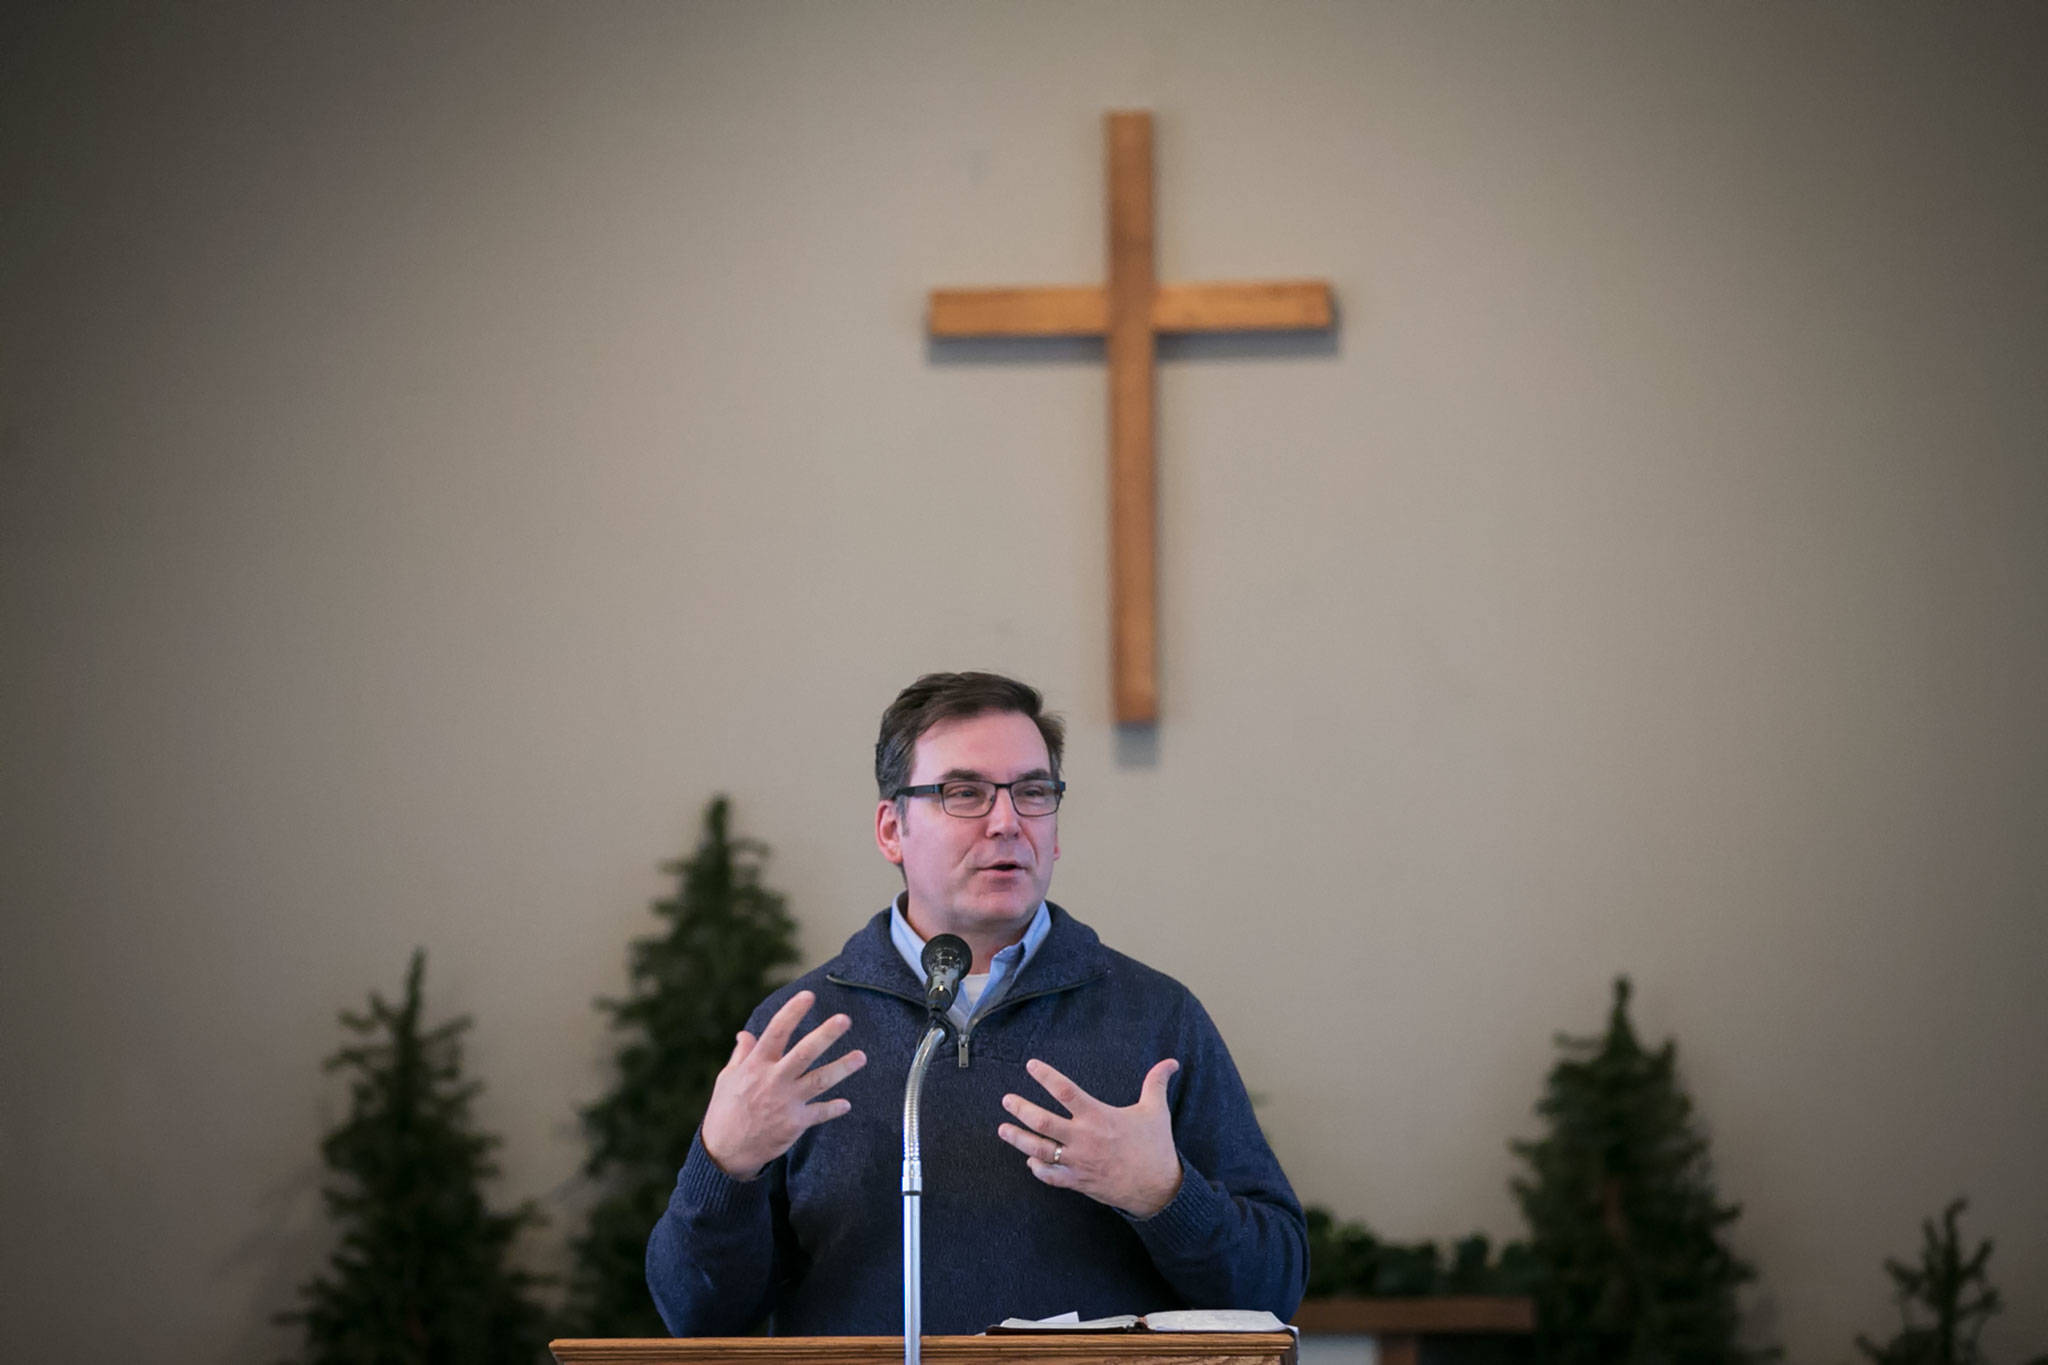 Rev. Mark Kohls delivers his sermon Sunday morning at North Creek Country Church on January 21, 2018. (Kevin Clark / The Daily Herald)